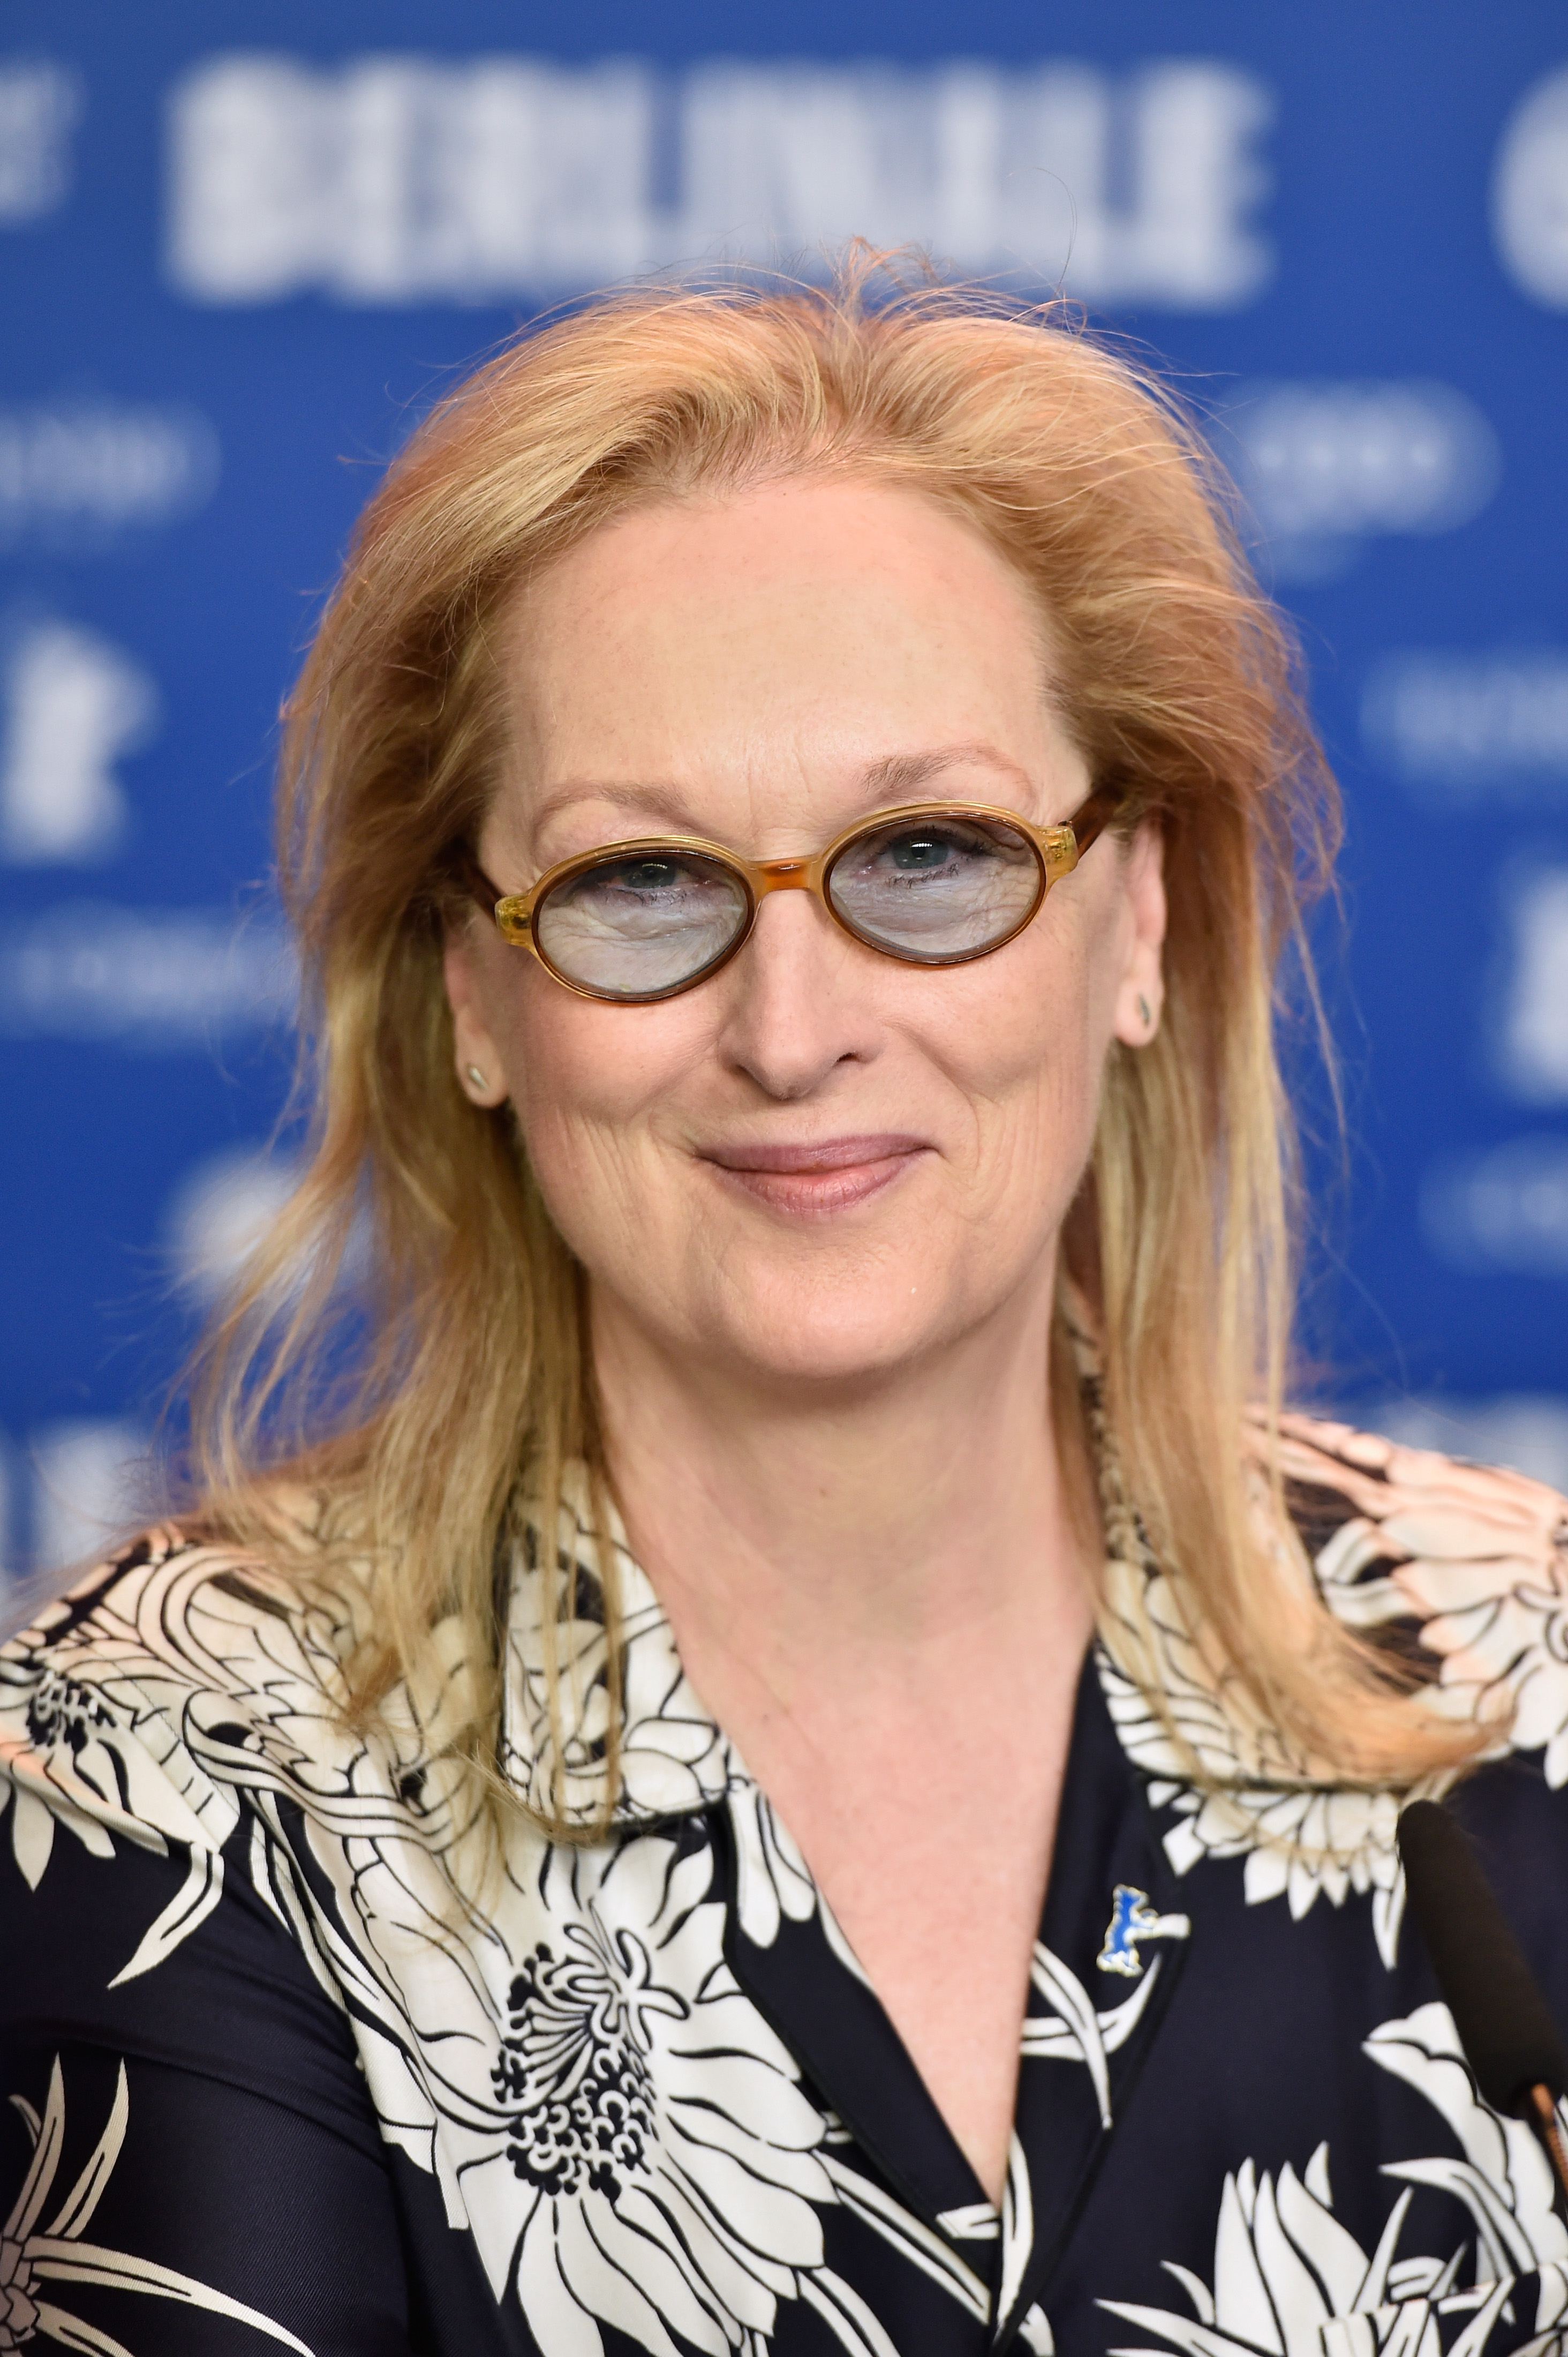 Meryl Streep on February 11, 2016, in Berlin, Germany | Source: Getty Images